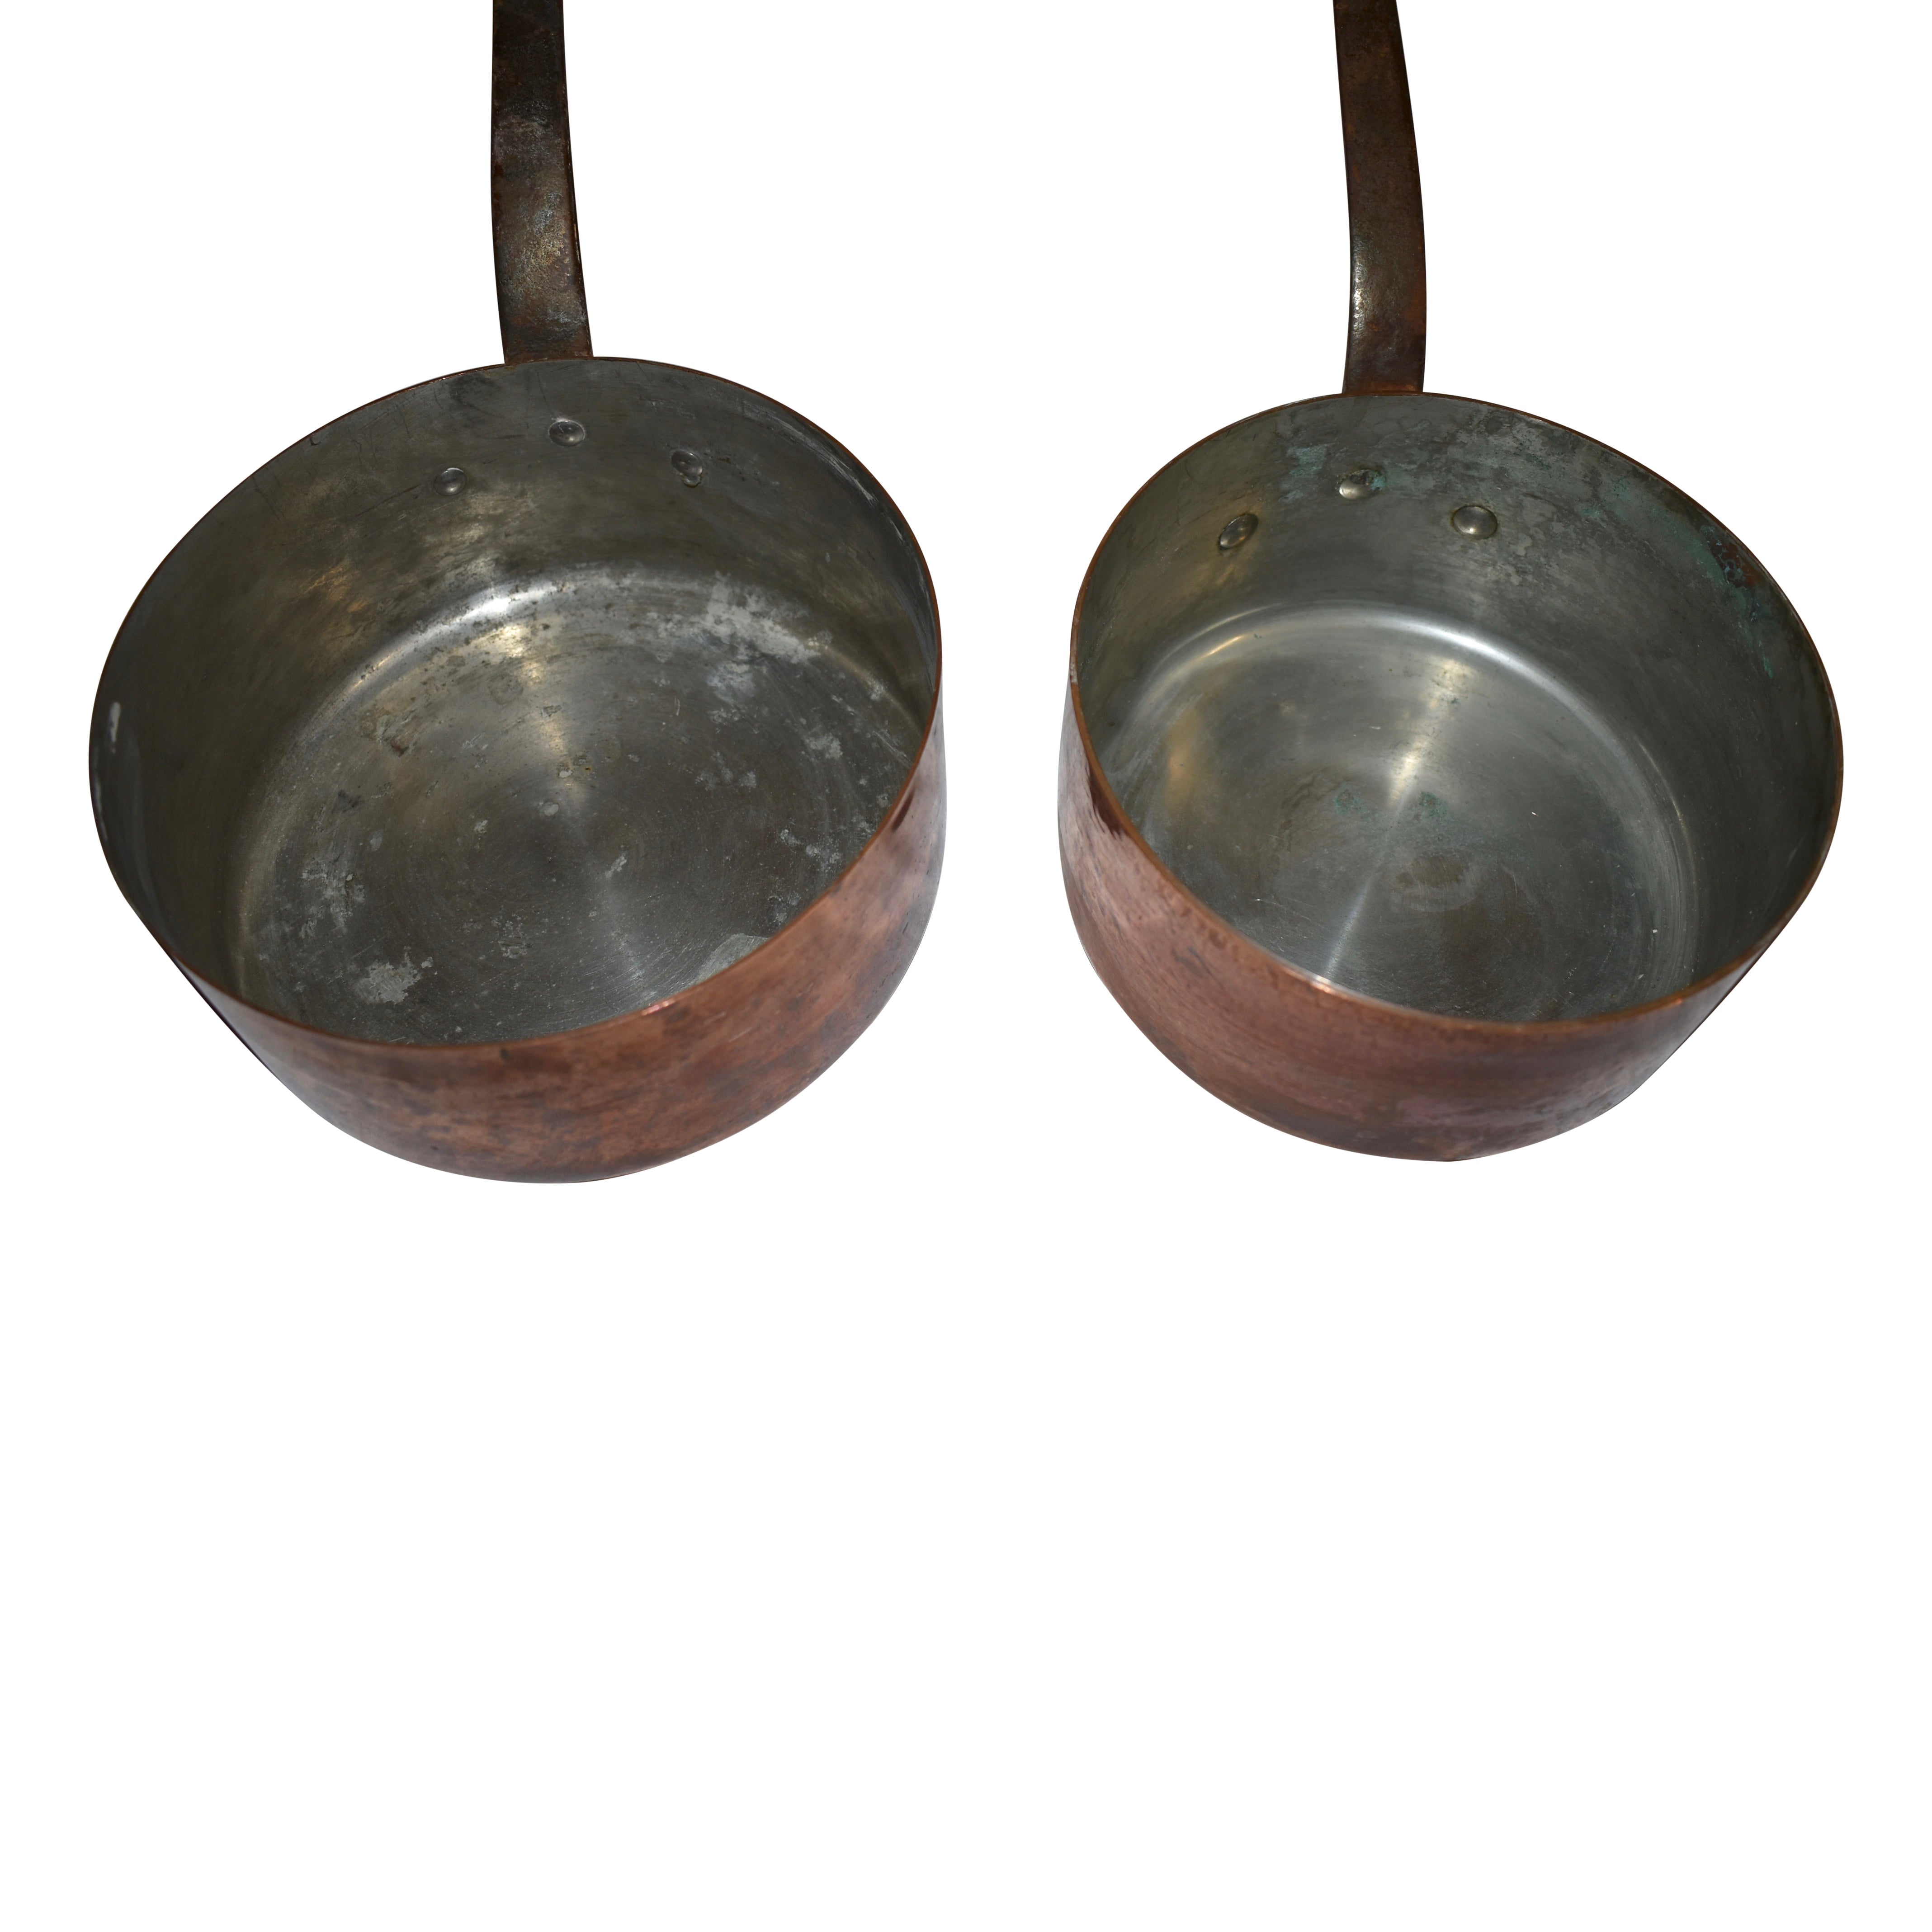 Copper Saucepans with Iron Handles